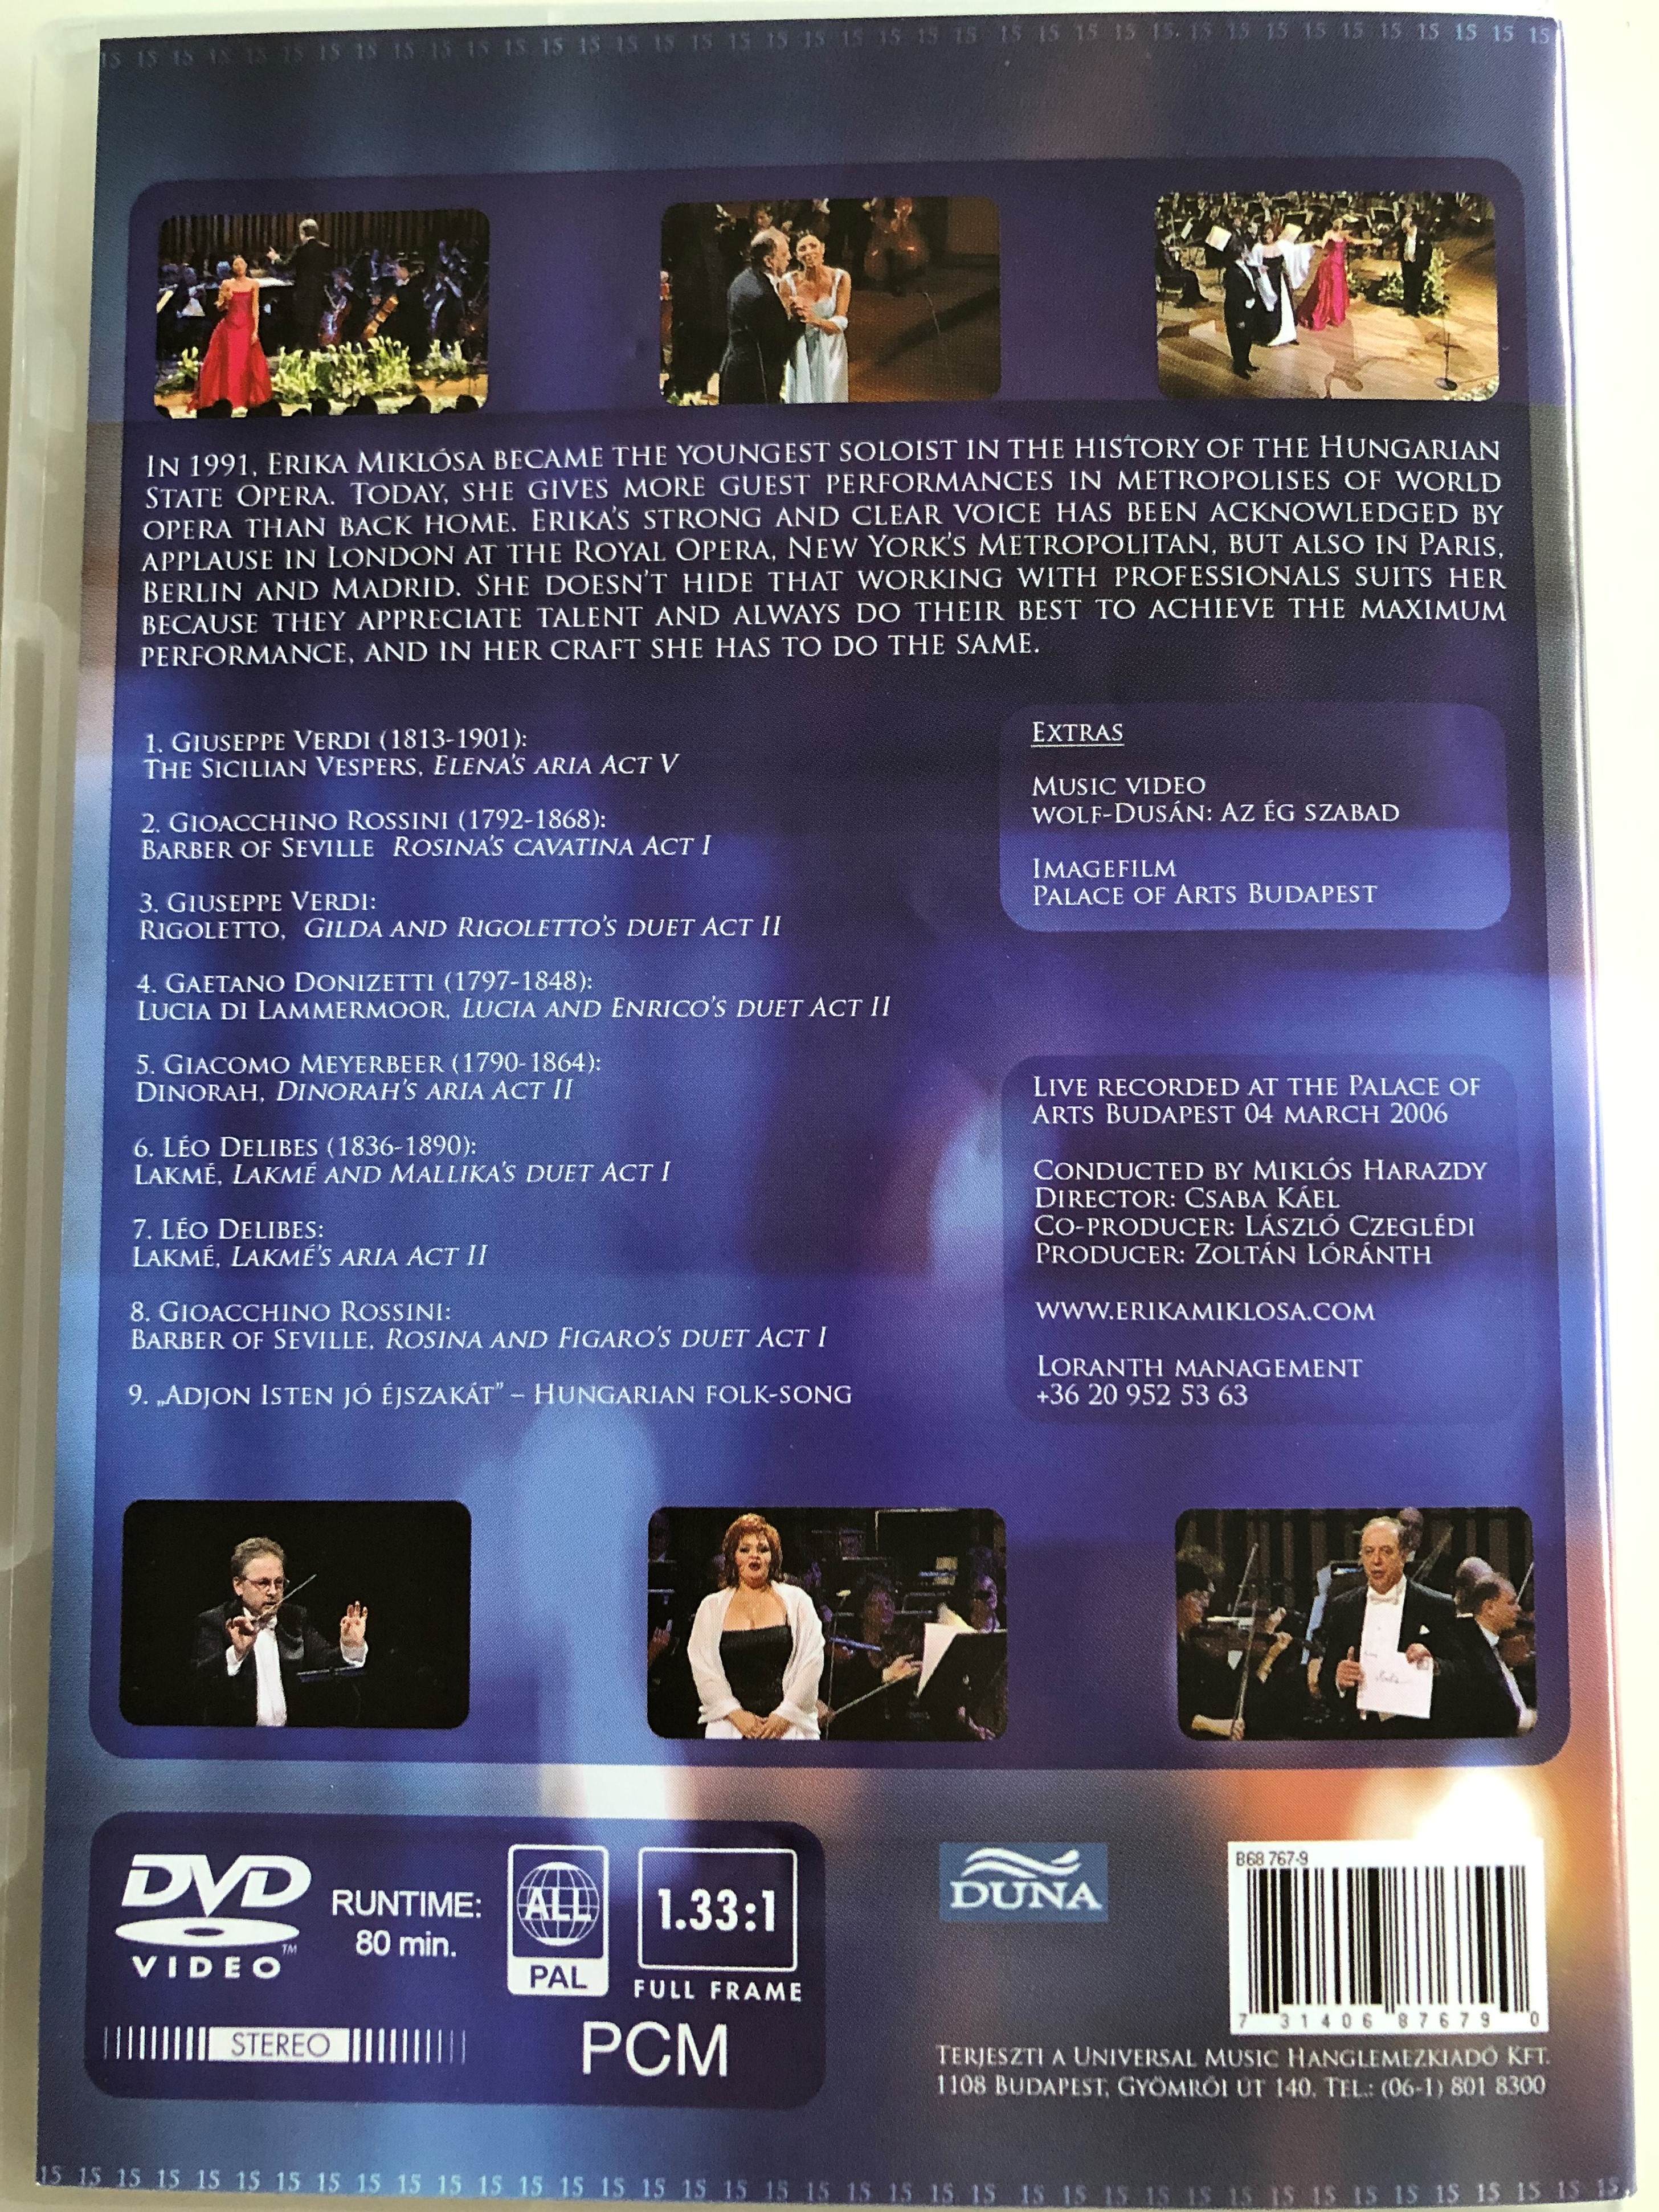 aria-evening-with-erika-mikl-sa-dvd-fifteen-years-in-music-jubilee-concert-at-the-palace-of-arts-budapest-2.jpg